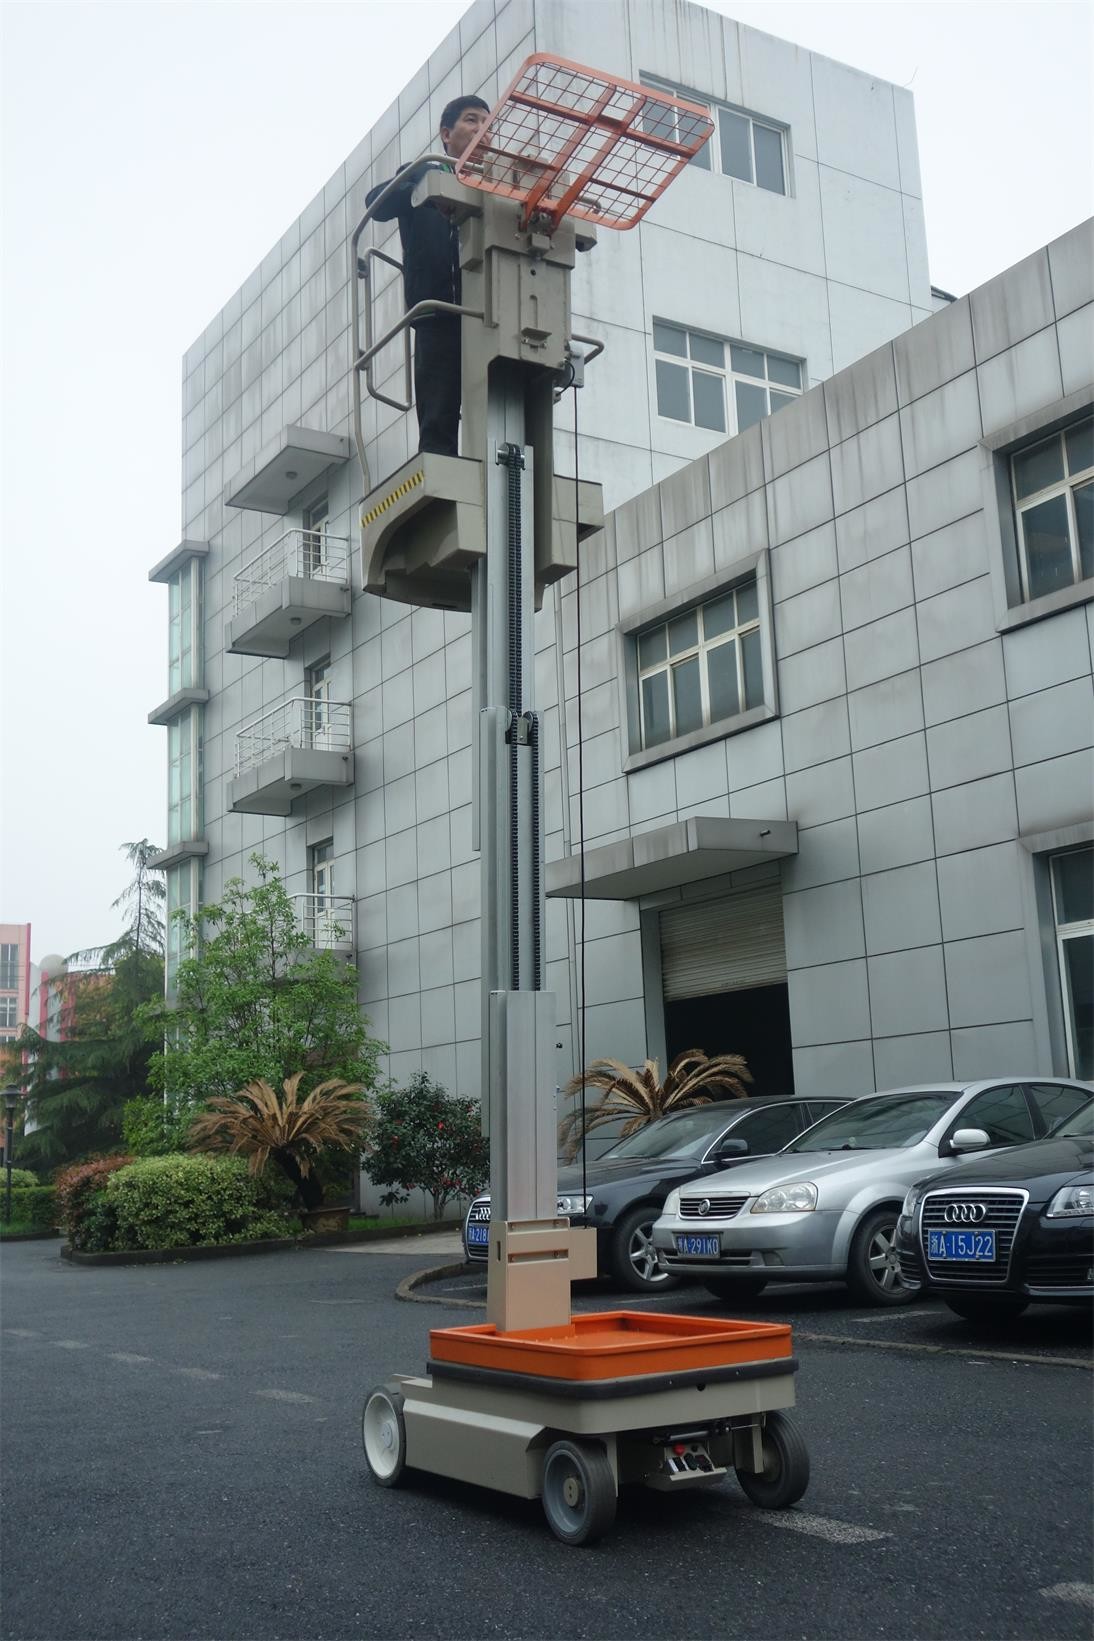 Wholesale Vertical Mast Type One Man lift Electric Aerial Work Platform Order Picker For Warehouse from china suppliers